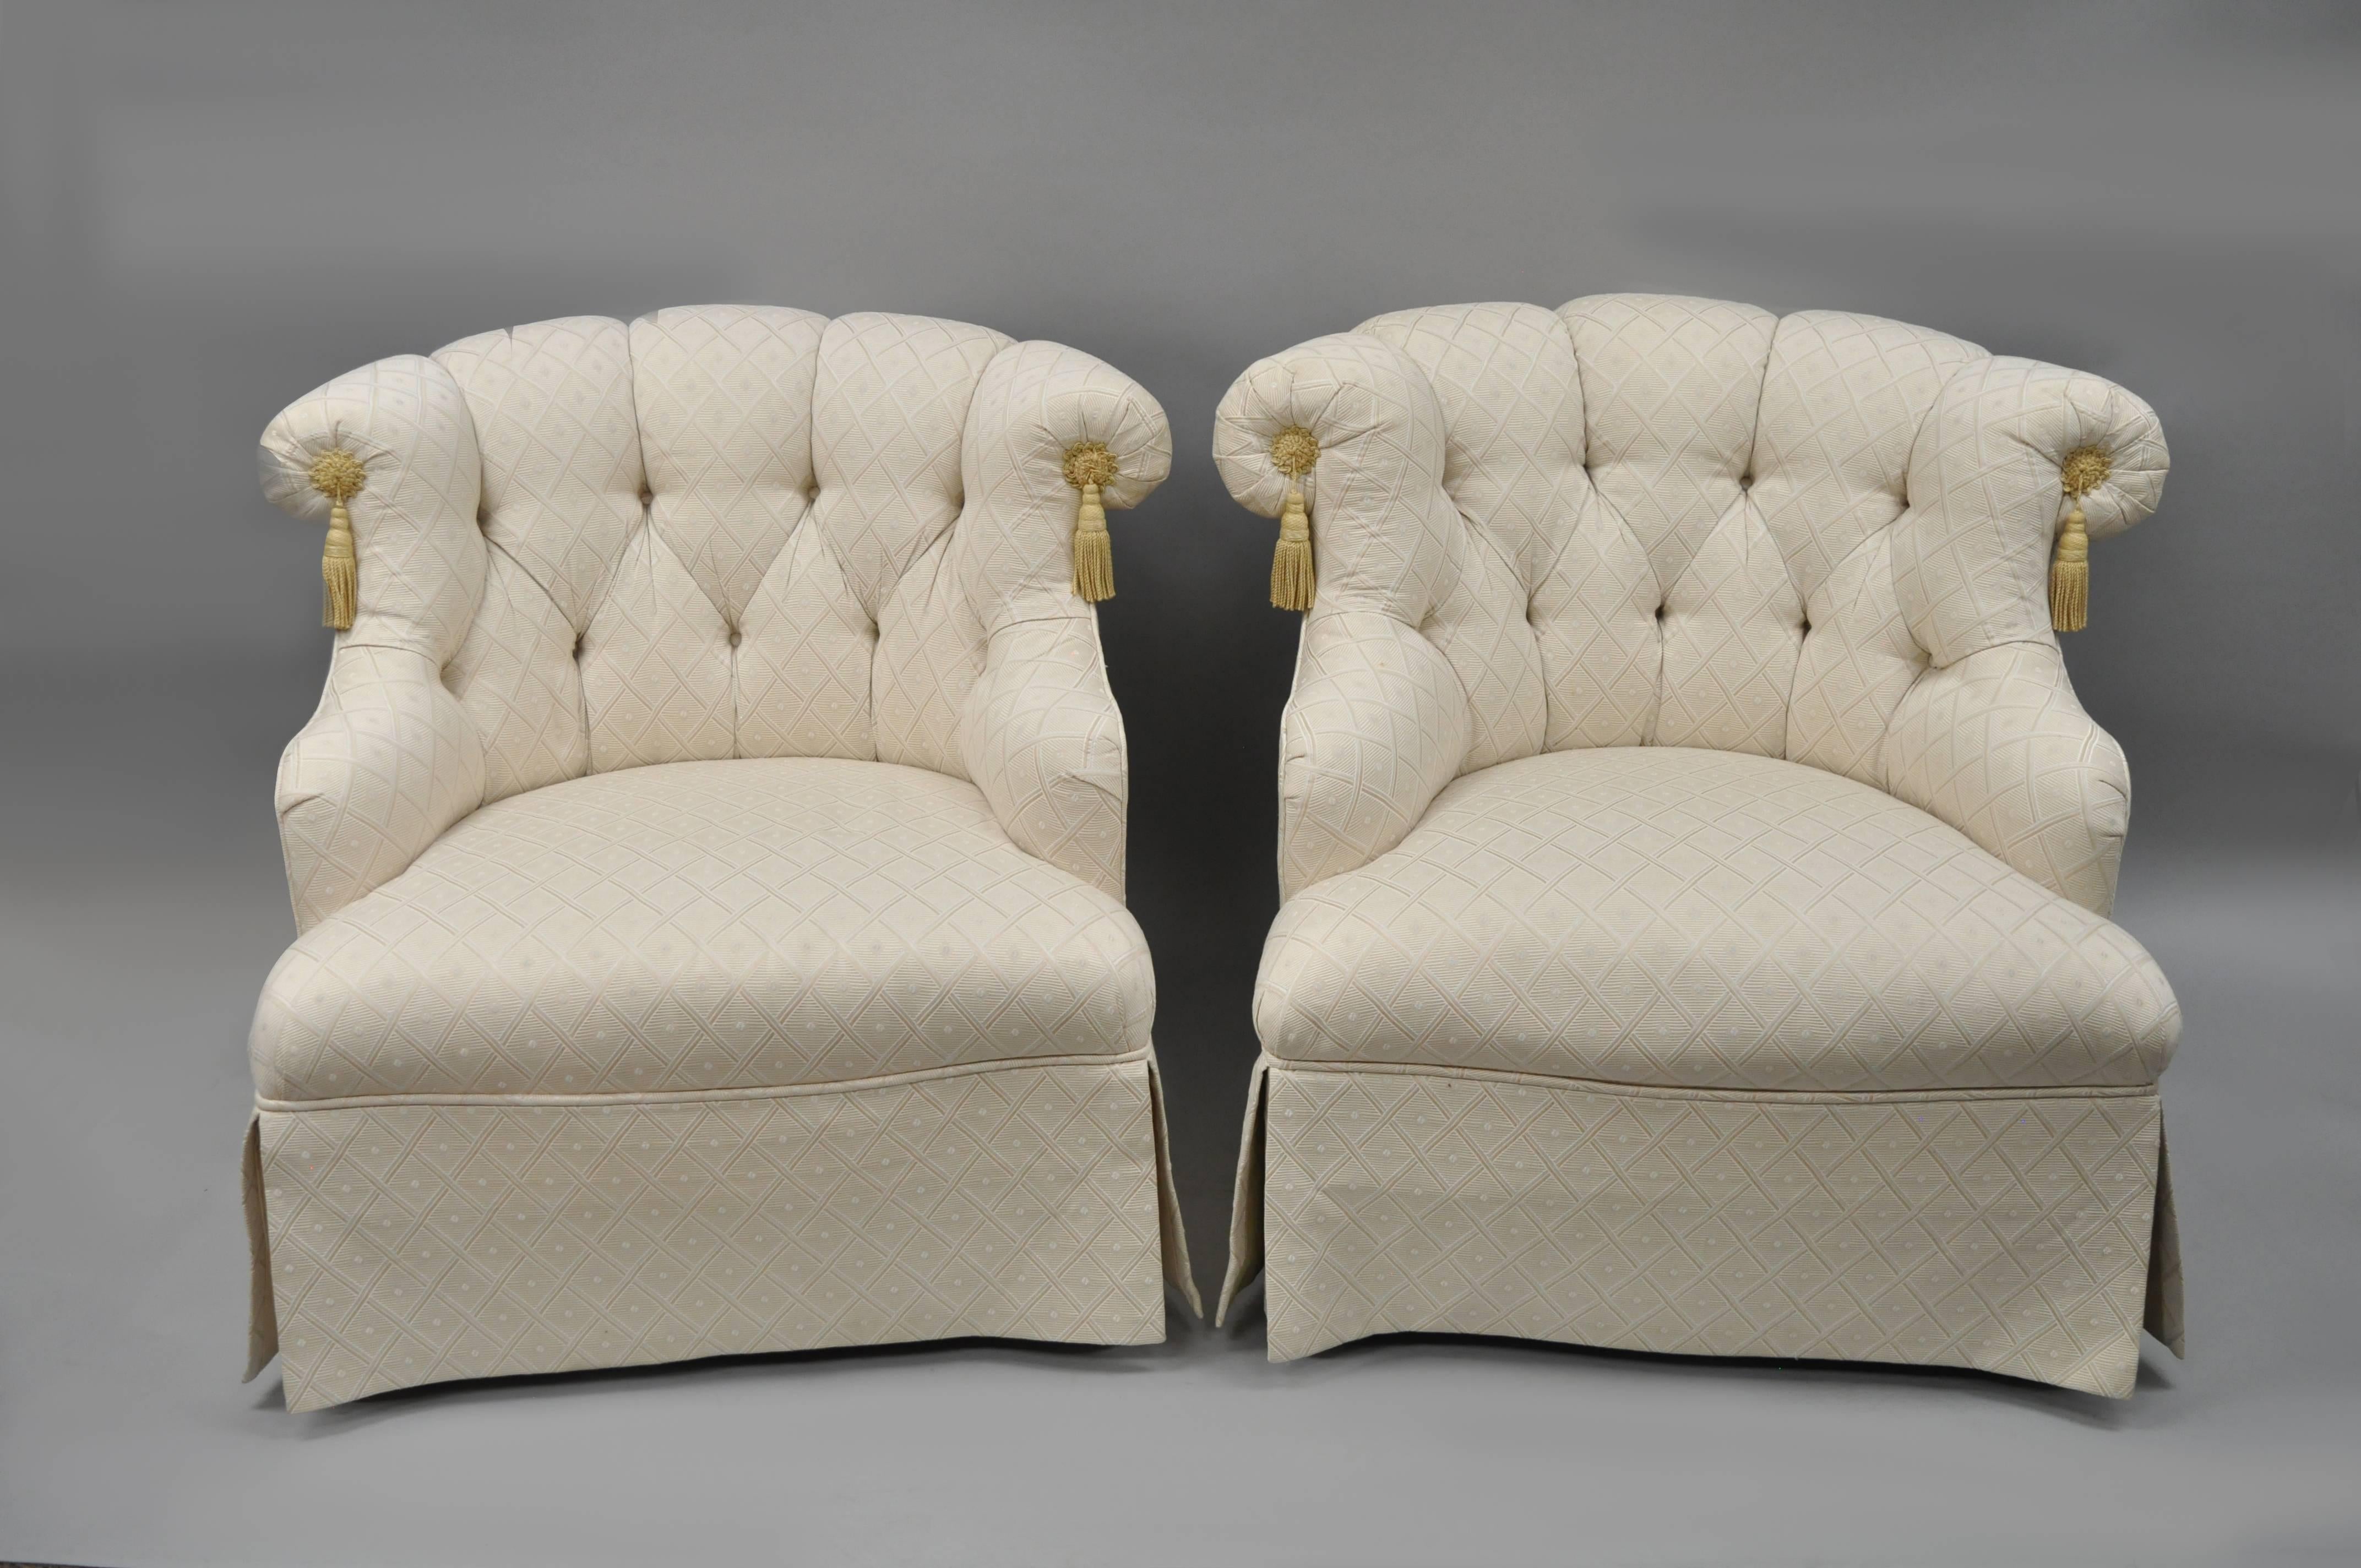 Pair of Napoleon III Tufted Slipper Lounge Chairs by Tomlinson Erwin-Lambeth 1